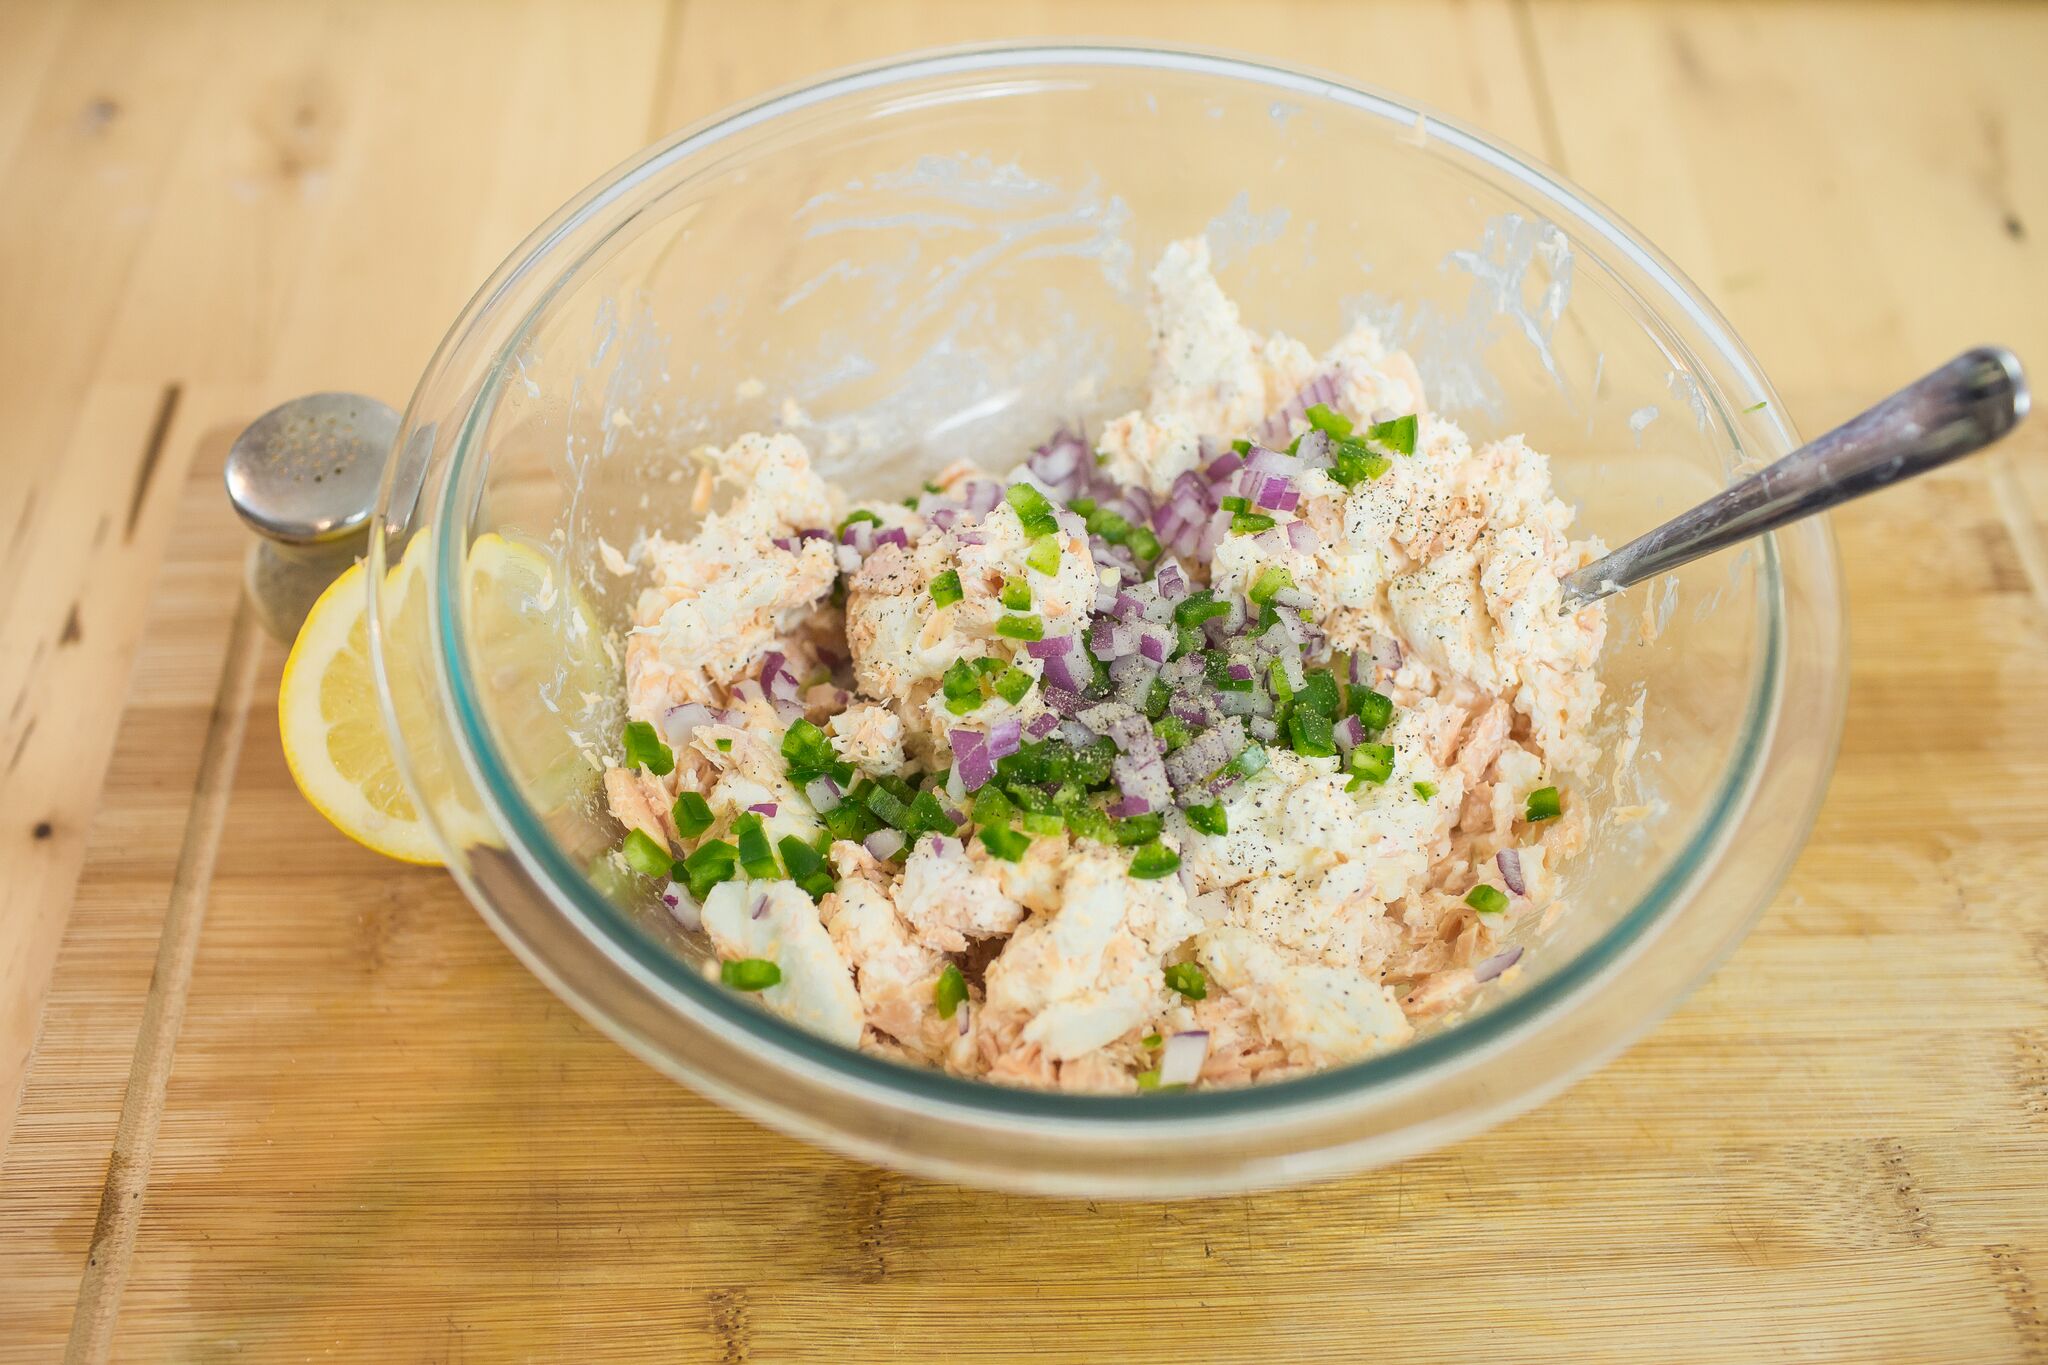 Add softened cream cheese, chopped jalapeno, red onion, lemon juice and pepper to salmon in the bowl and mix. 